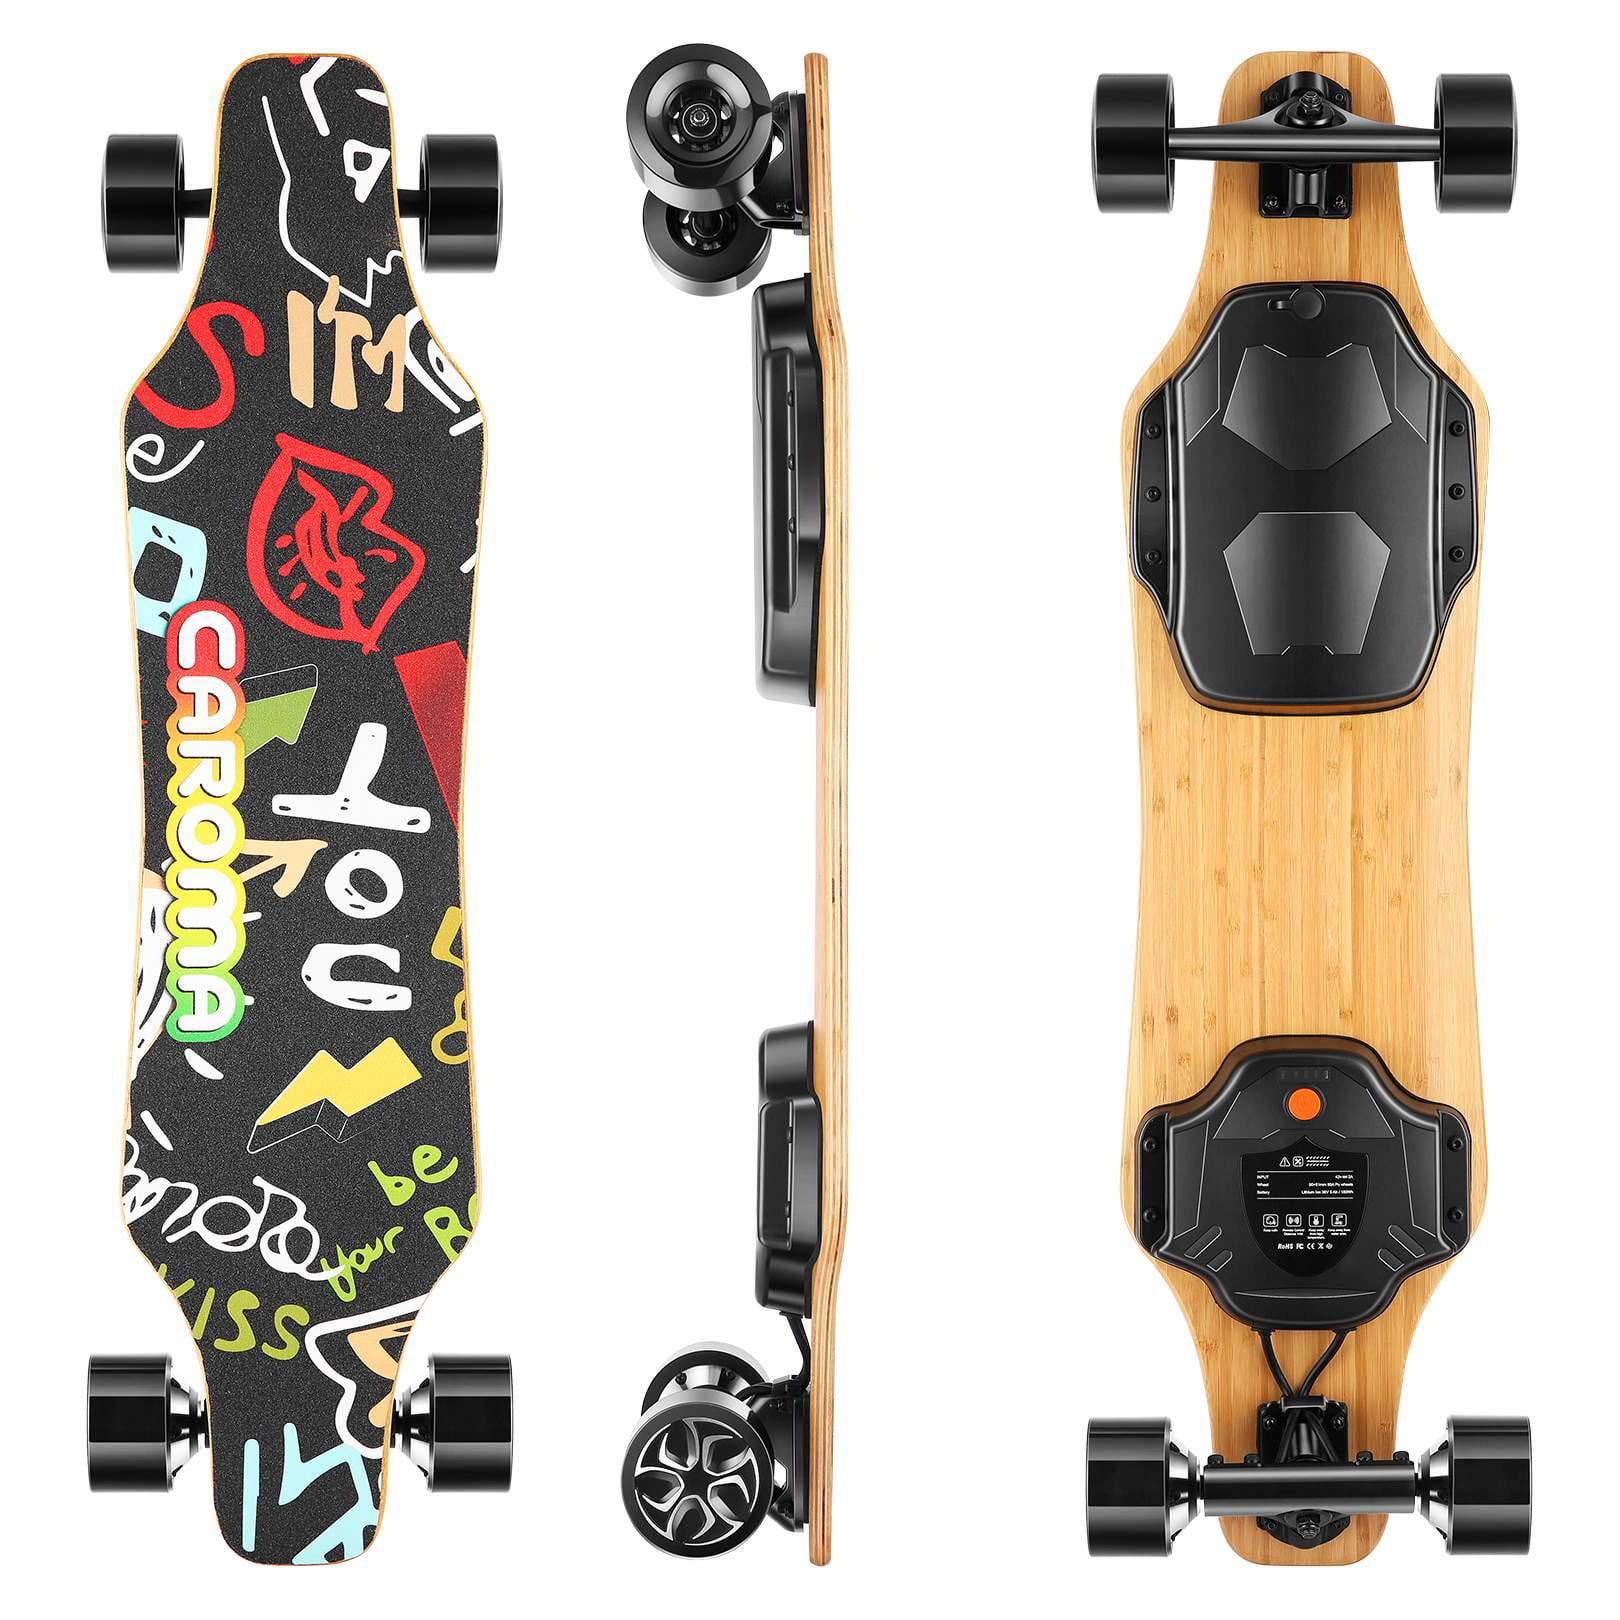 Details about   CAROMA Electric Skateboard Power Motor Cruiser Maple Long Board with Remote b 02 